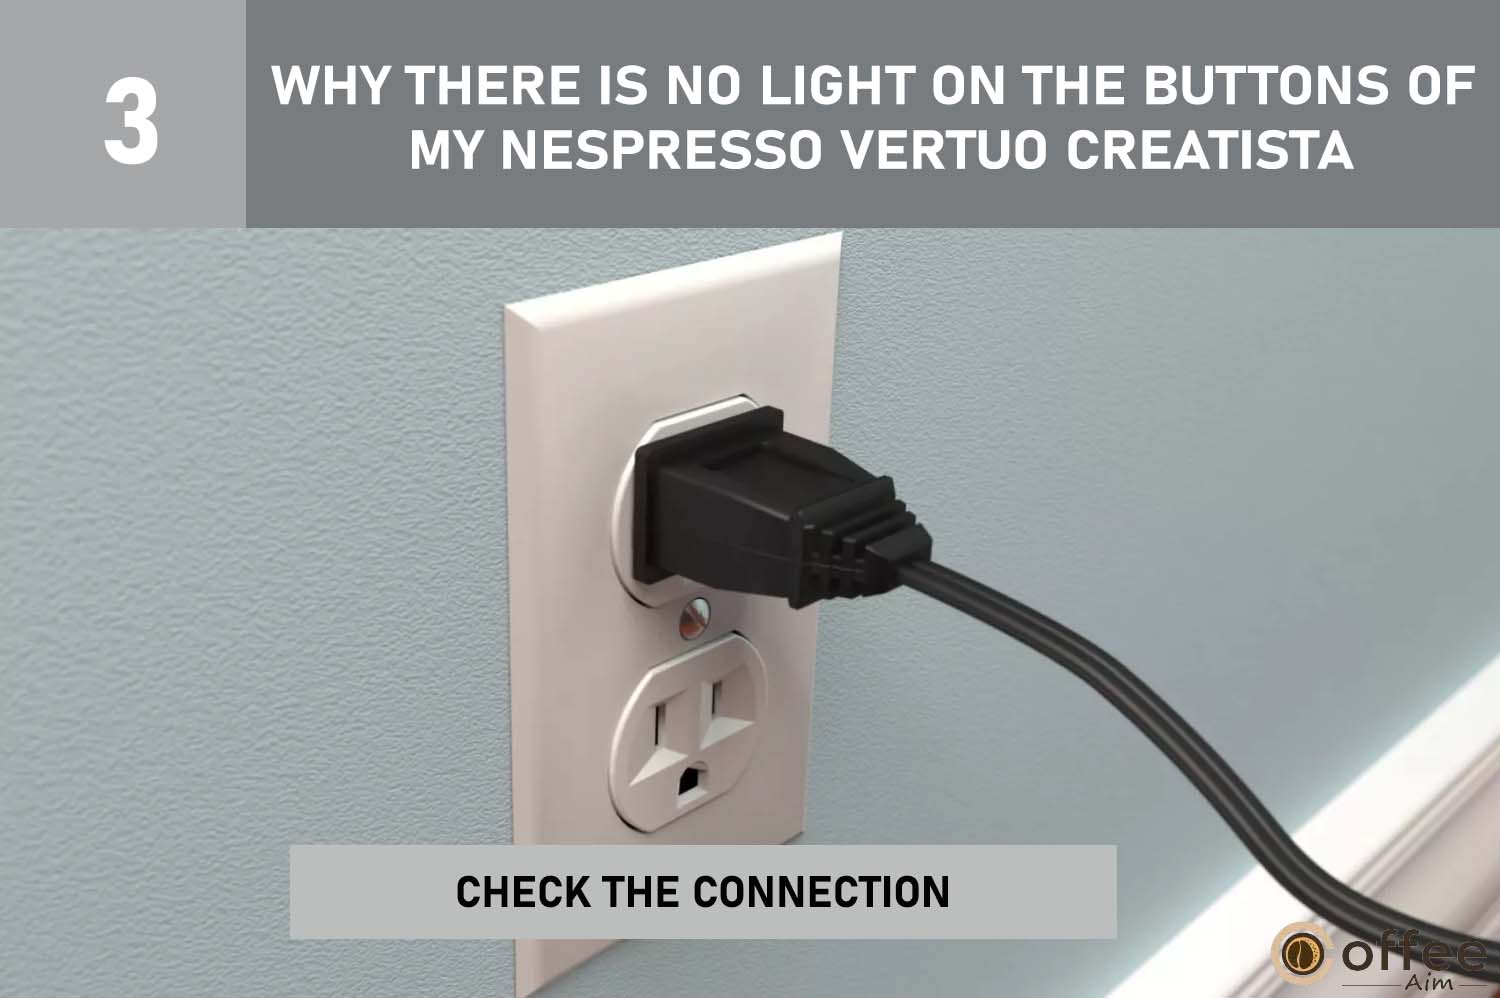 The image shows how to fix Nespresso Vertuo Creatista buttons not lighting up by checking the connection. Simple troubleshooting.




